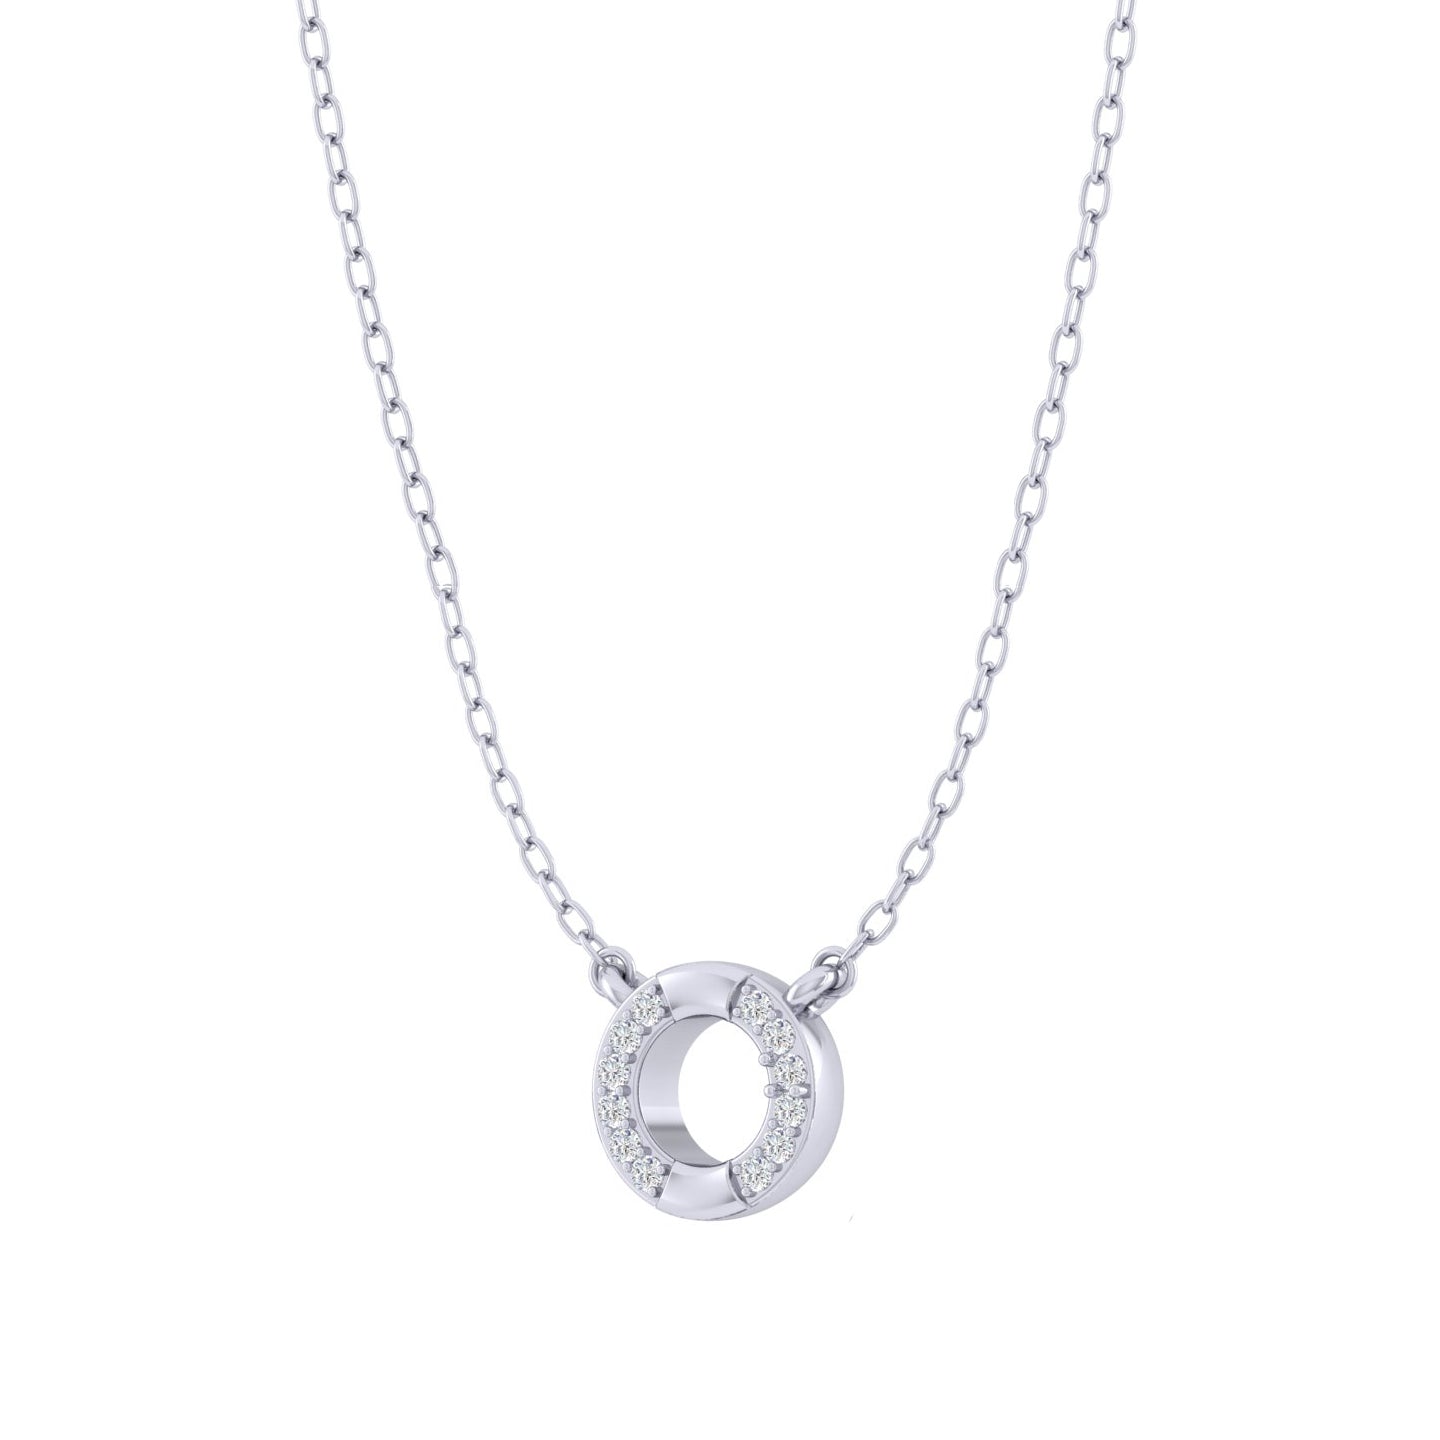 Karma Circle 1/20 Cttw Natural Diamond Pendant Necklace set in 925 Sterling Silver